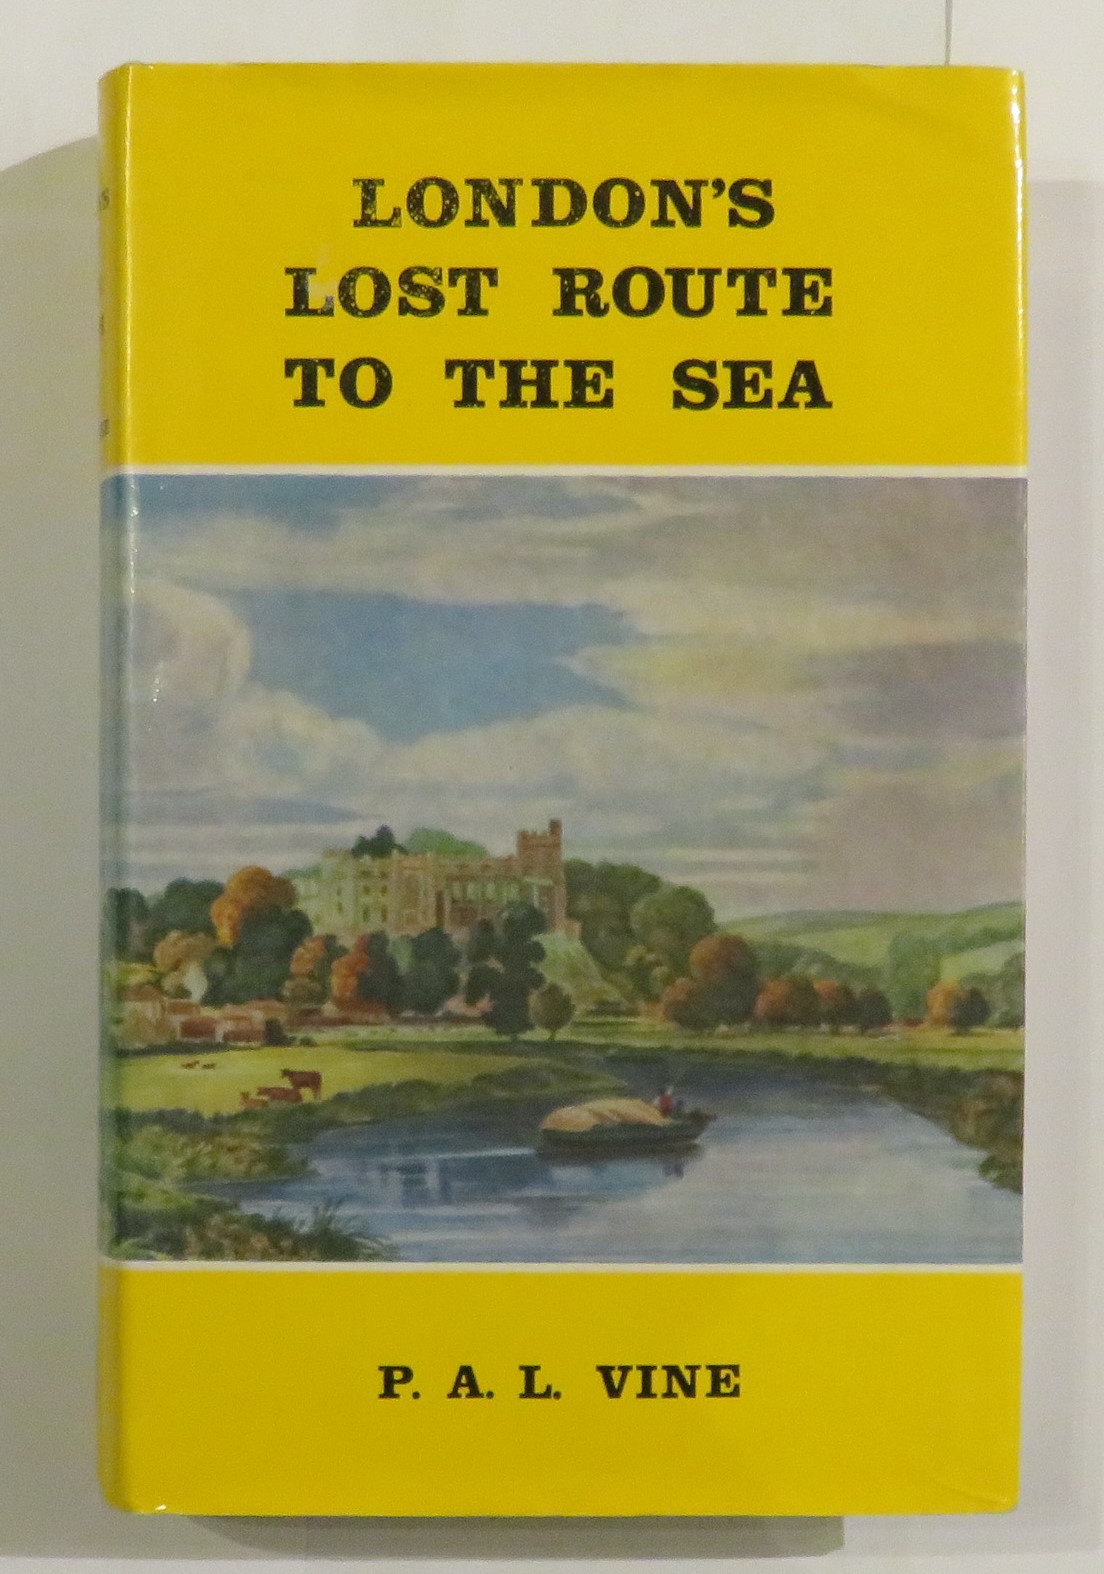 London's Lost Route to the Sea